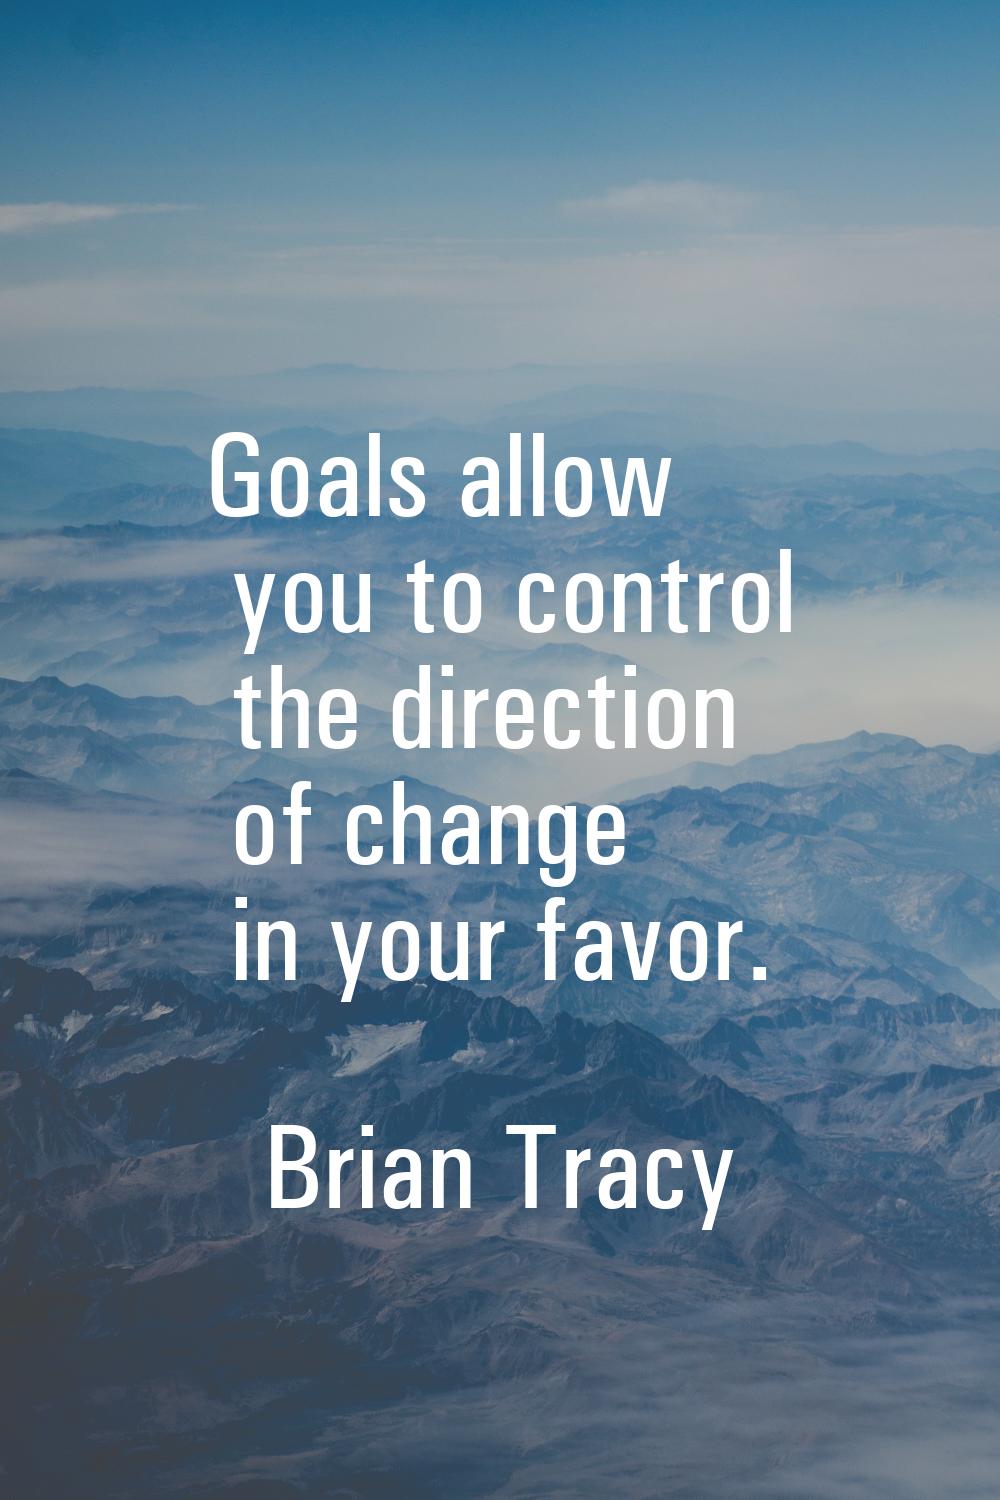 Goals allow you to control the direction of change in your favor.